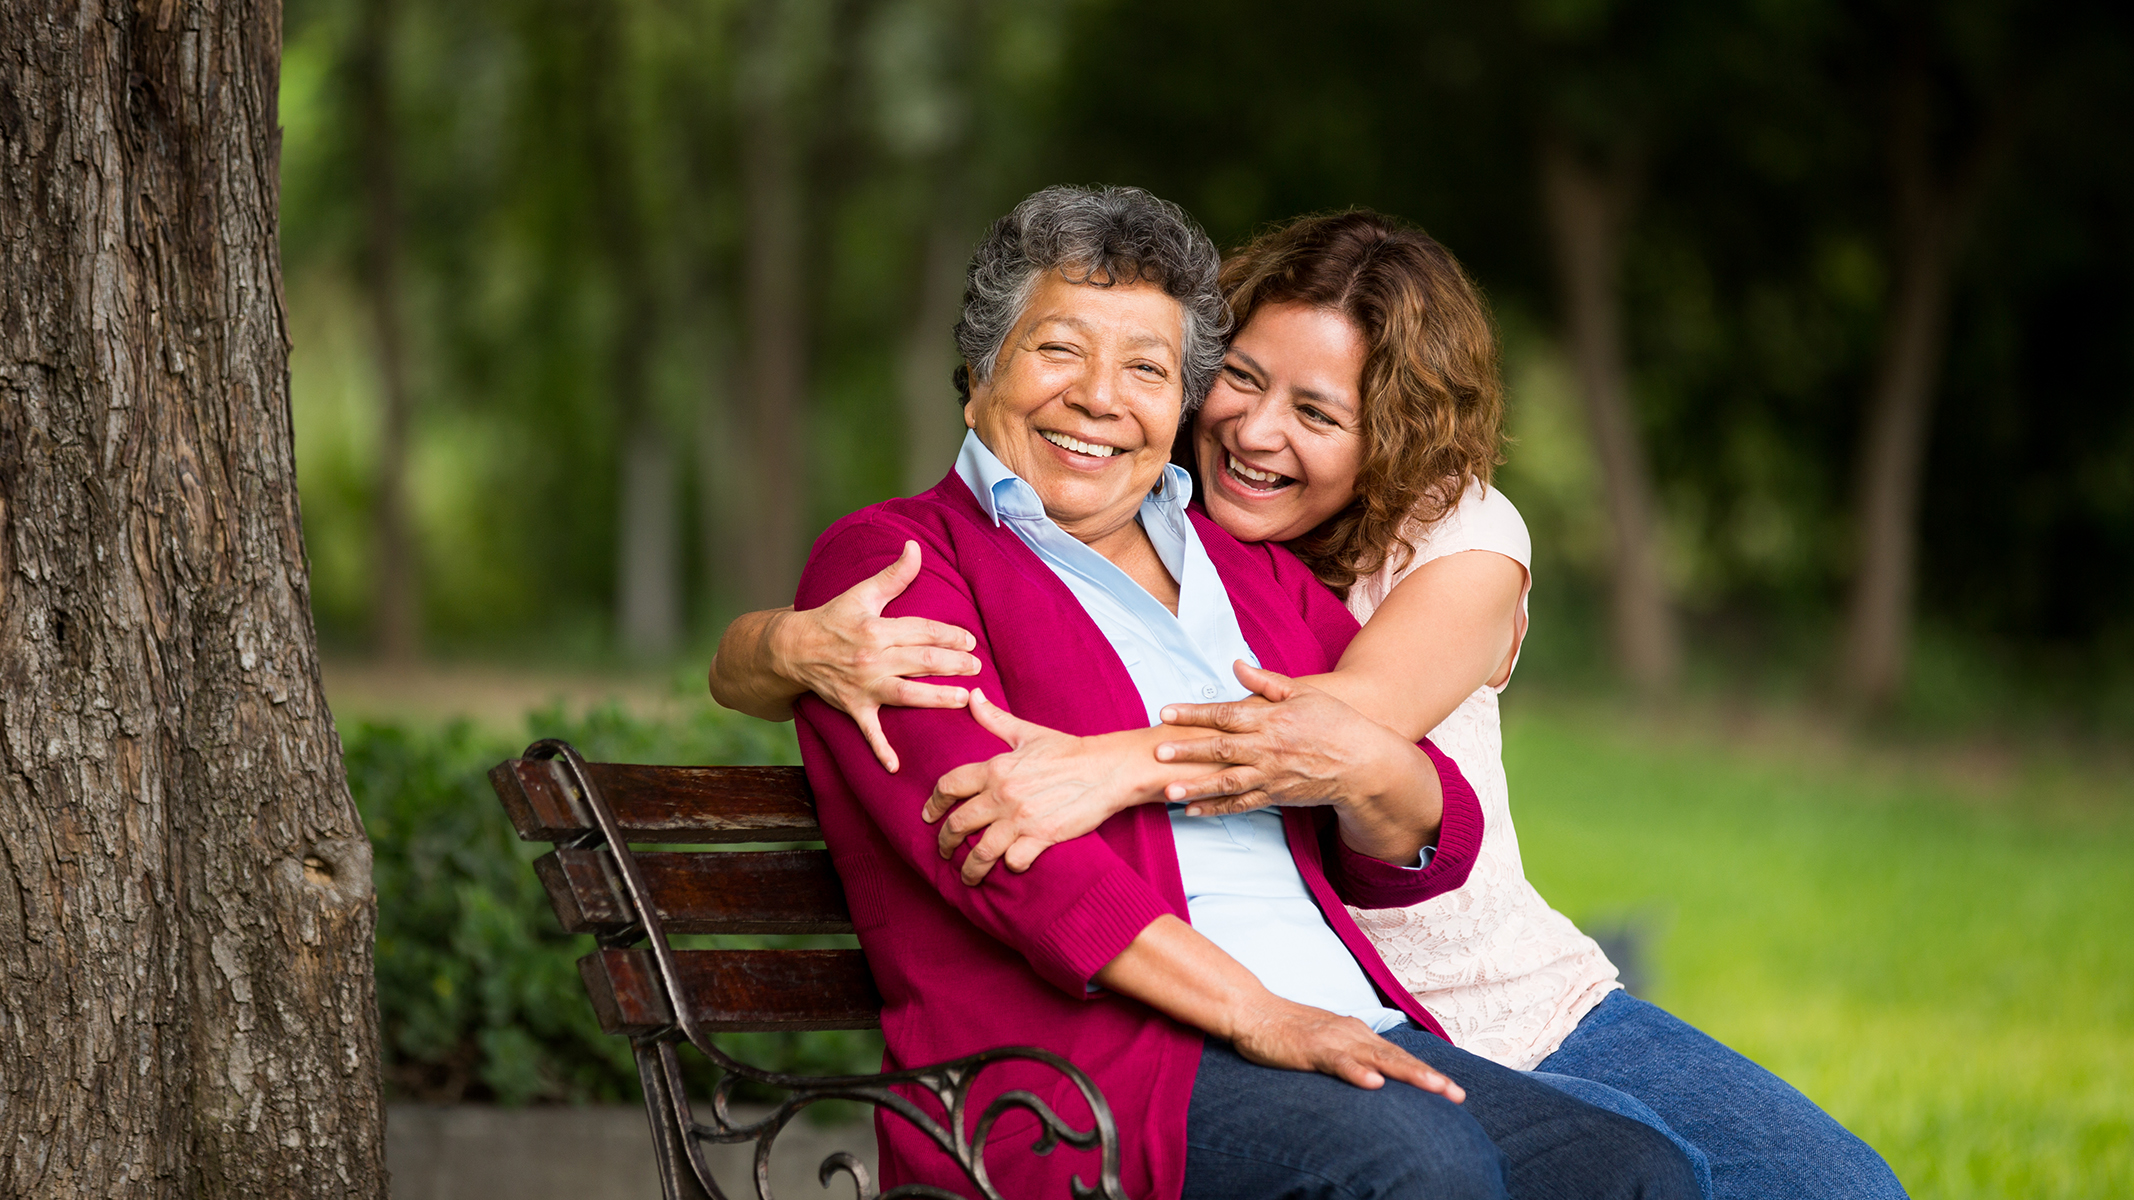 Senior woman being hugged by younger woman on park bench.